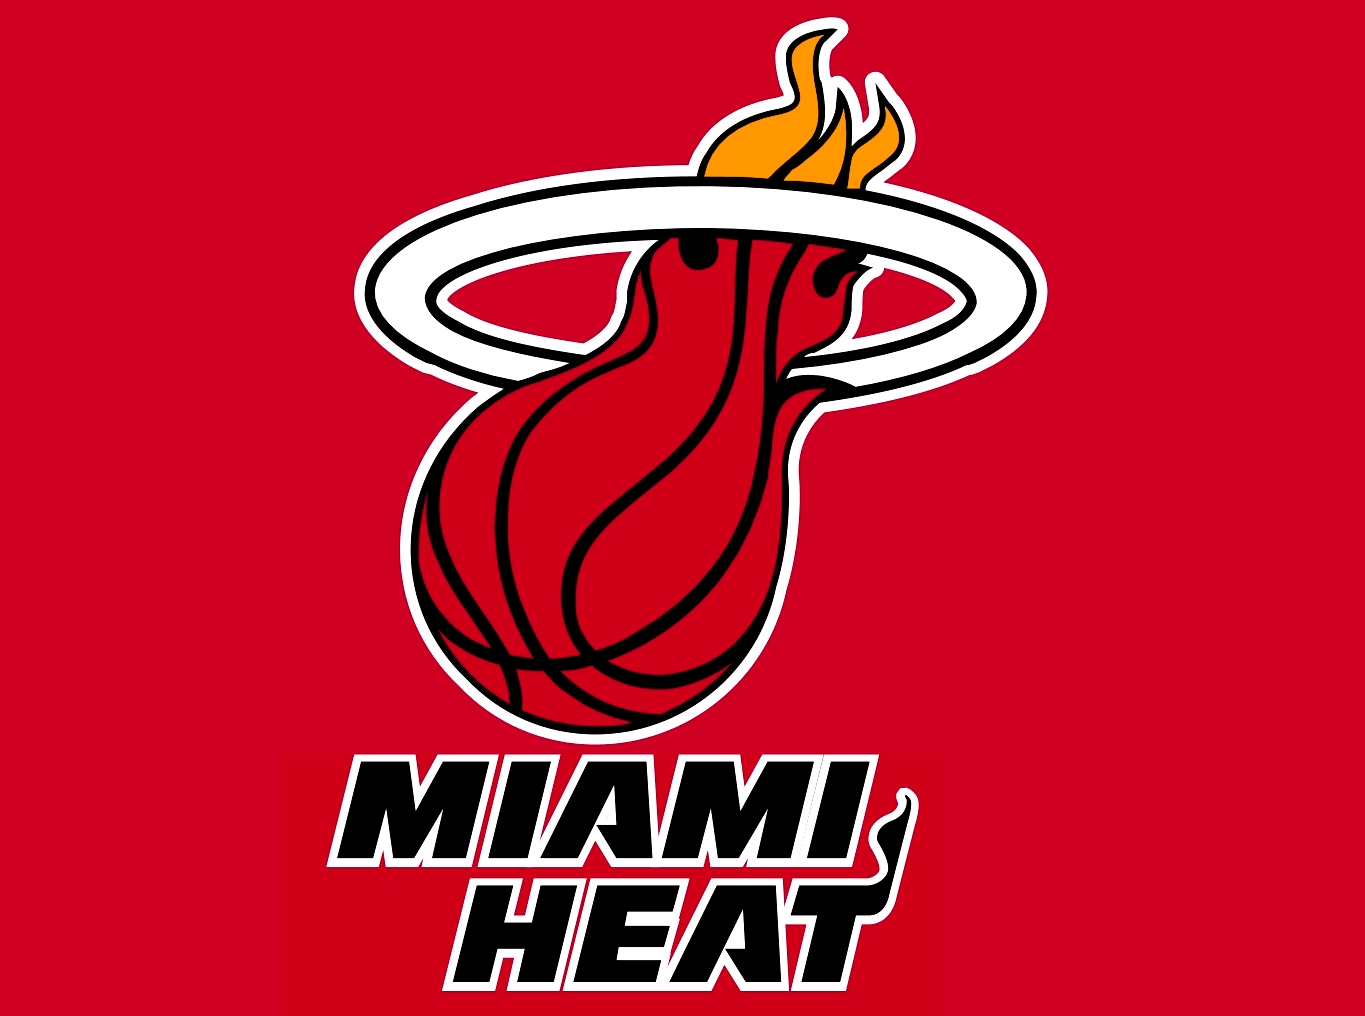 Miami Heat Logo Download in HD Quality